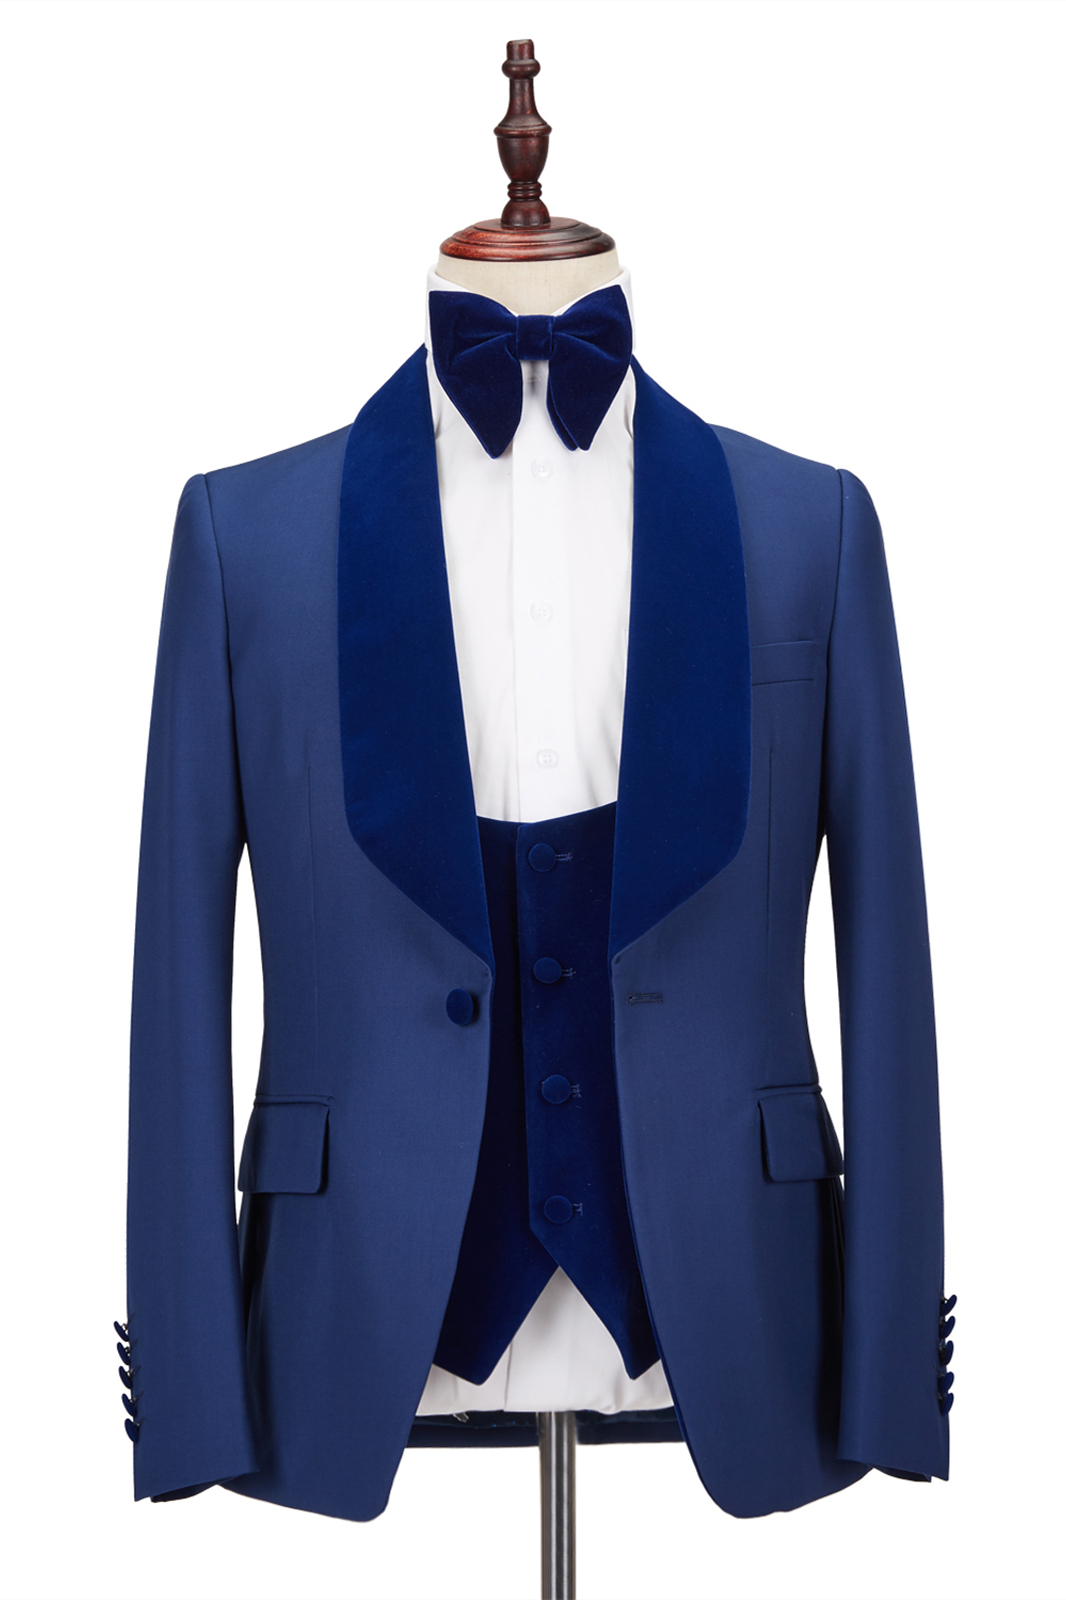 Fabulous One Button Suits For Wedding Party Stitching Velvet With Shawl Lapel Royal Blue - lulusllly